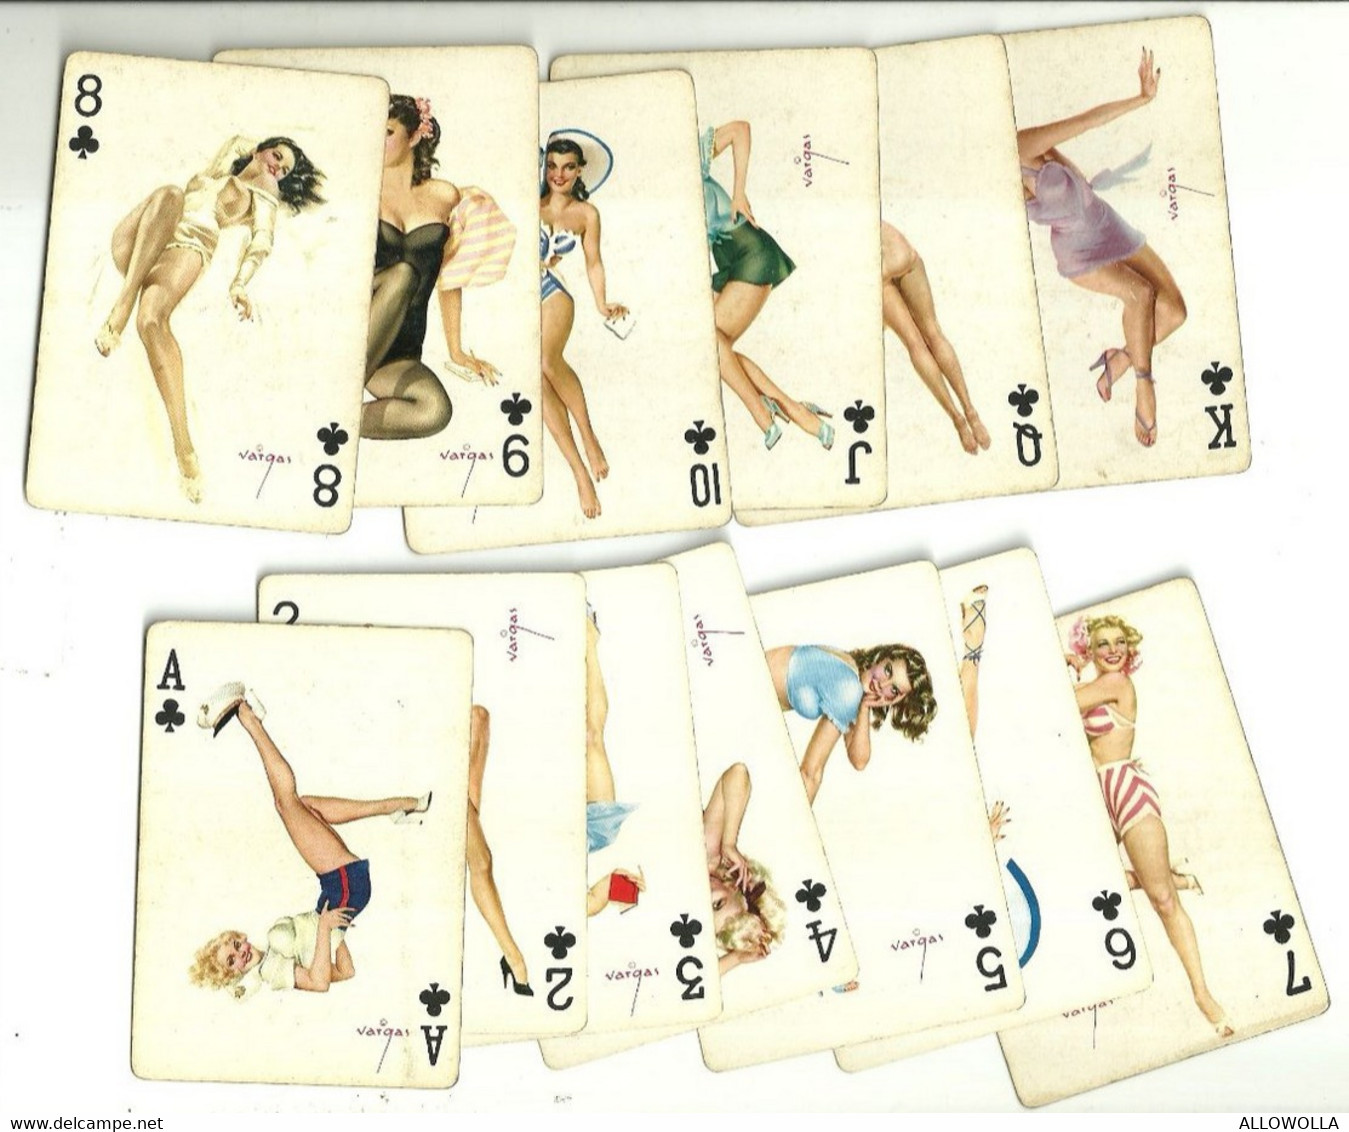 Sexy Playing Cards charmed indeed